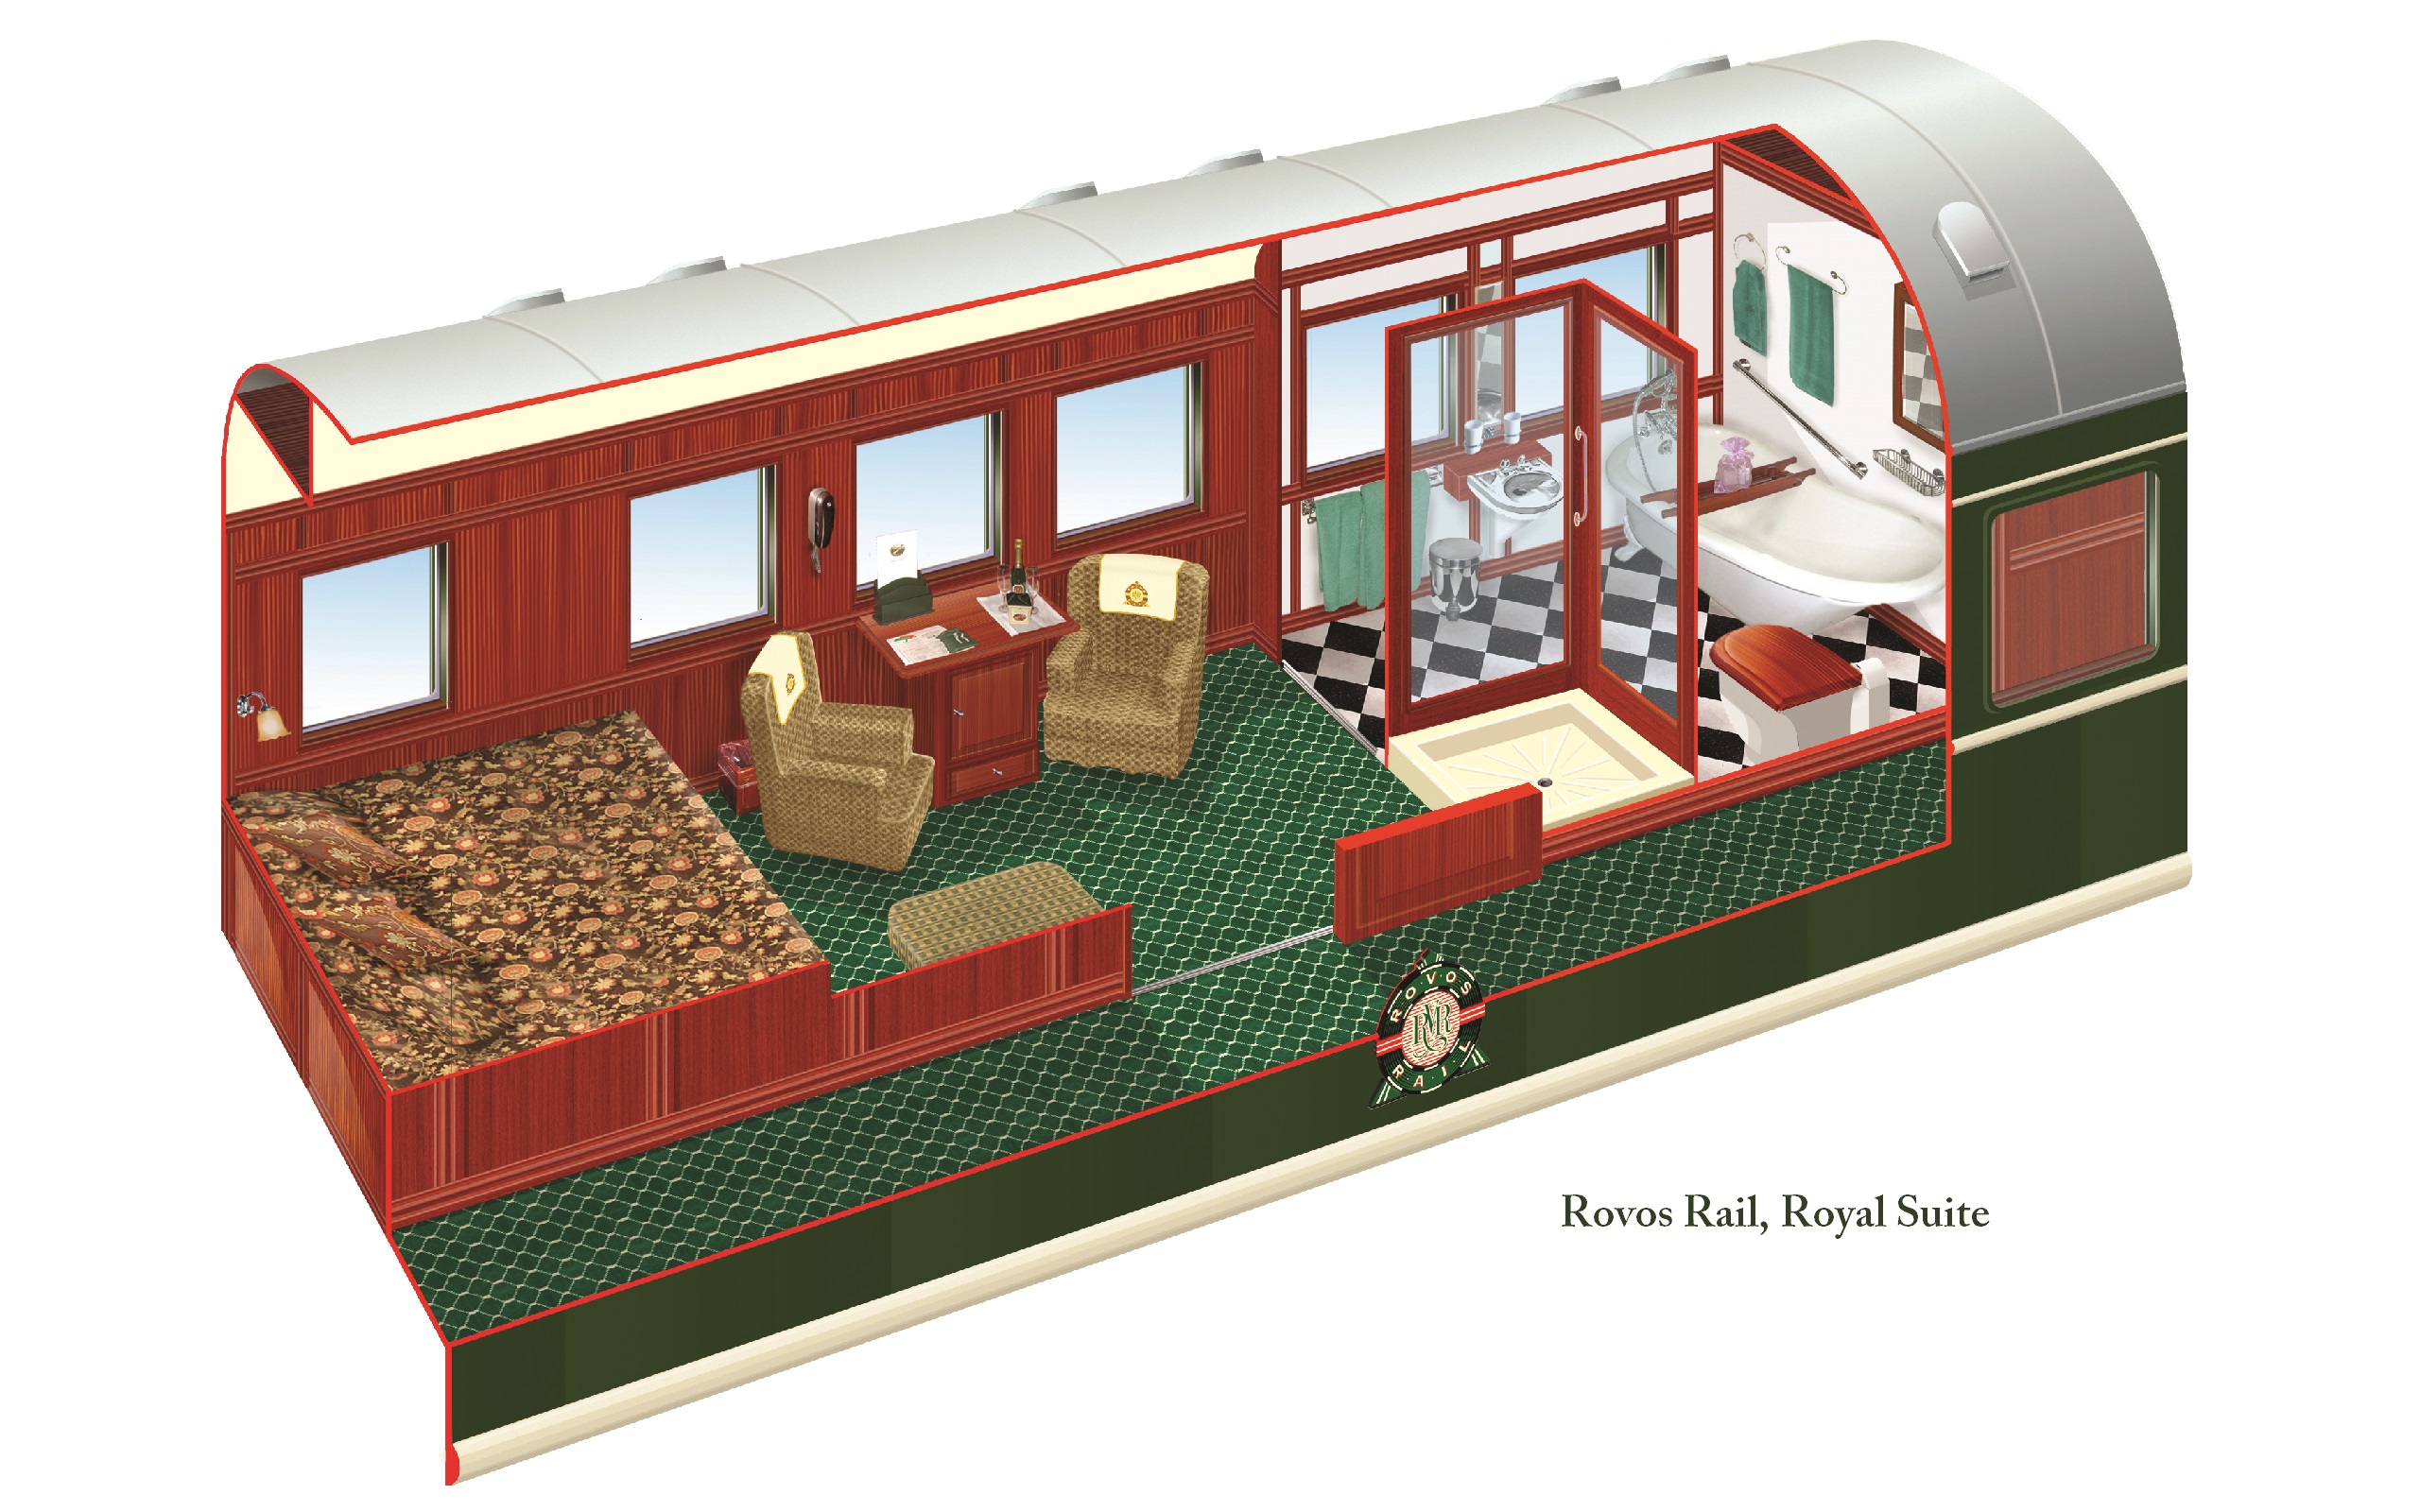 Rovos Rail Trains Offer all the Same Amenities as a 5-Star Hotel